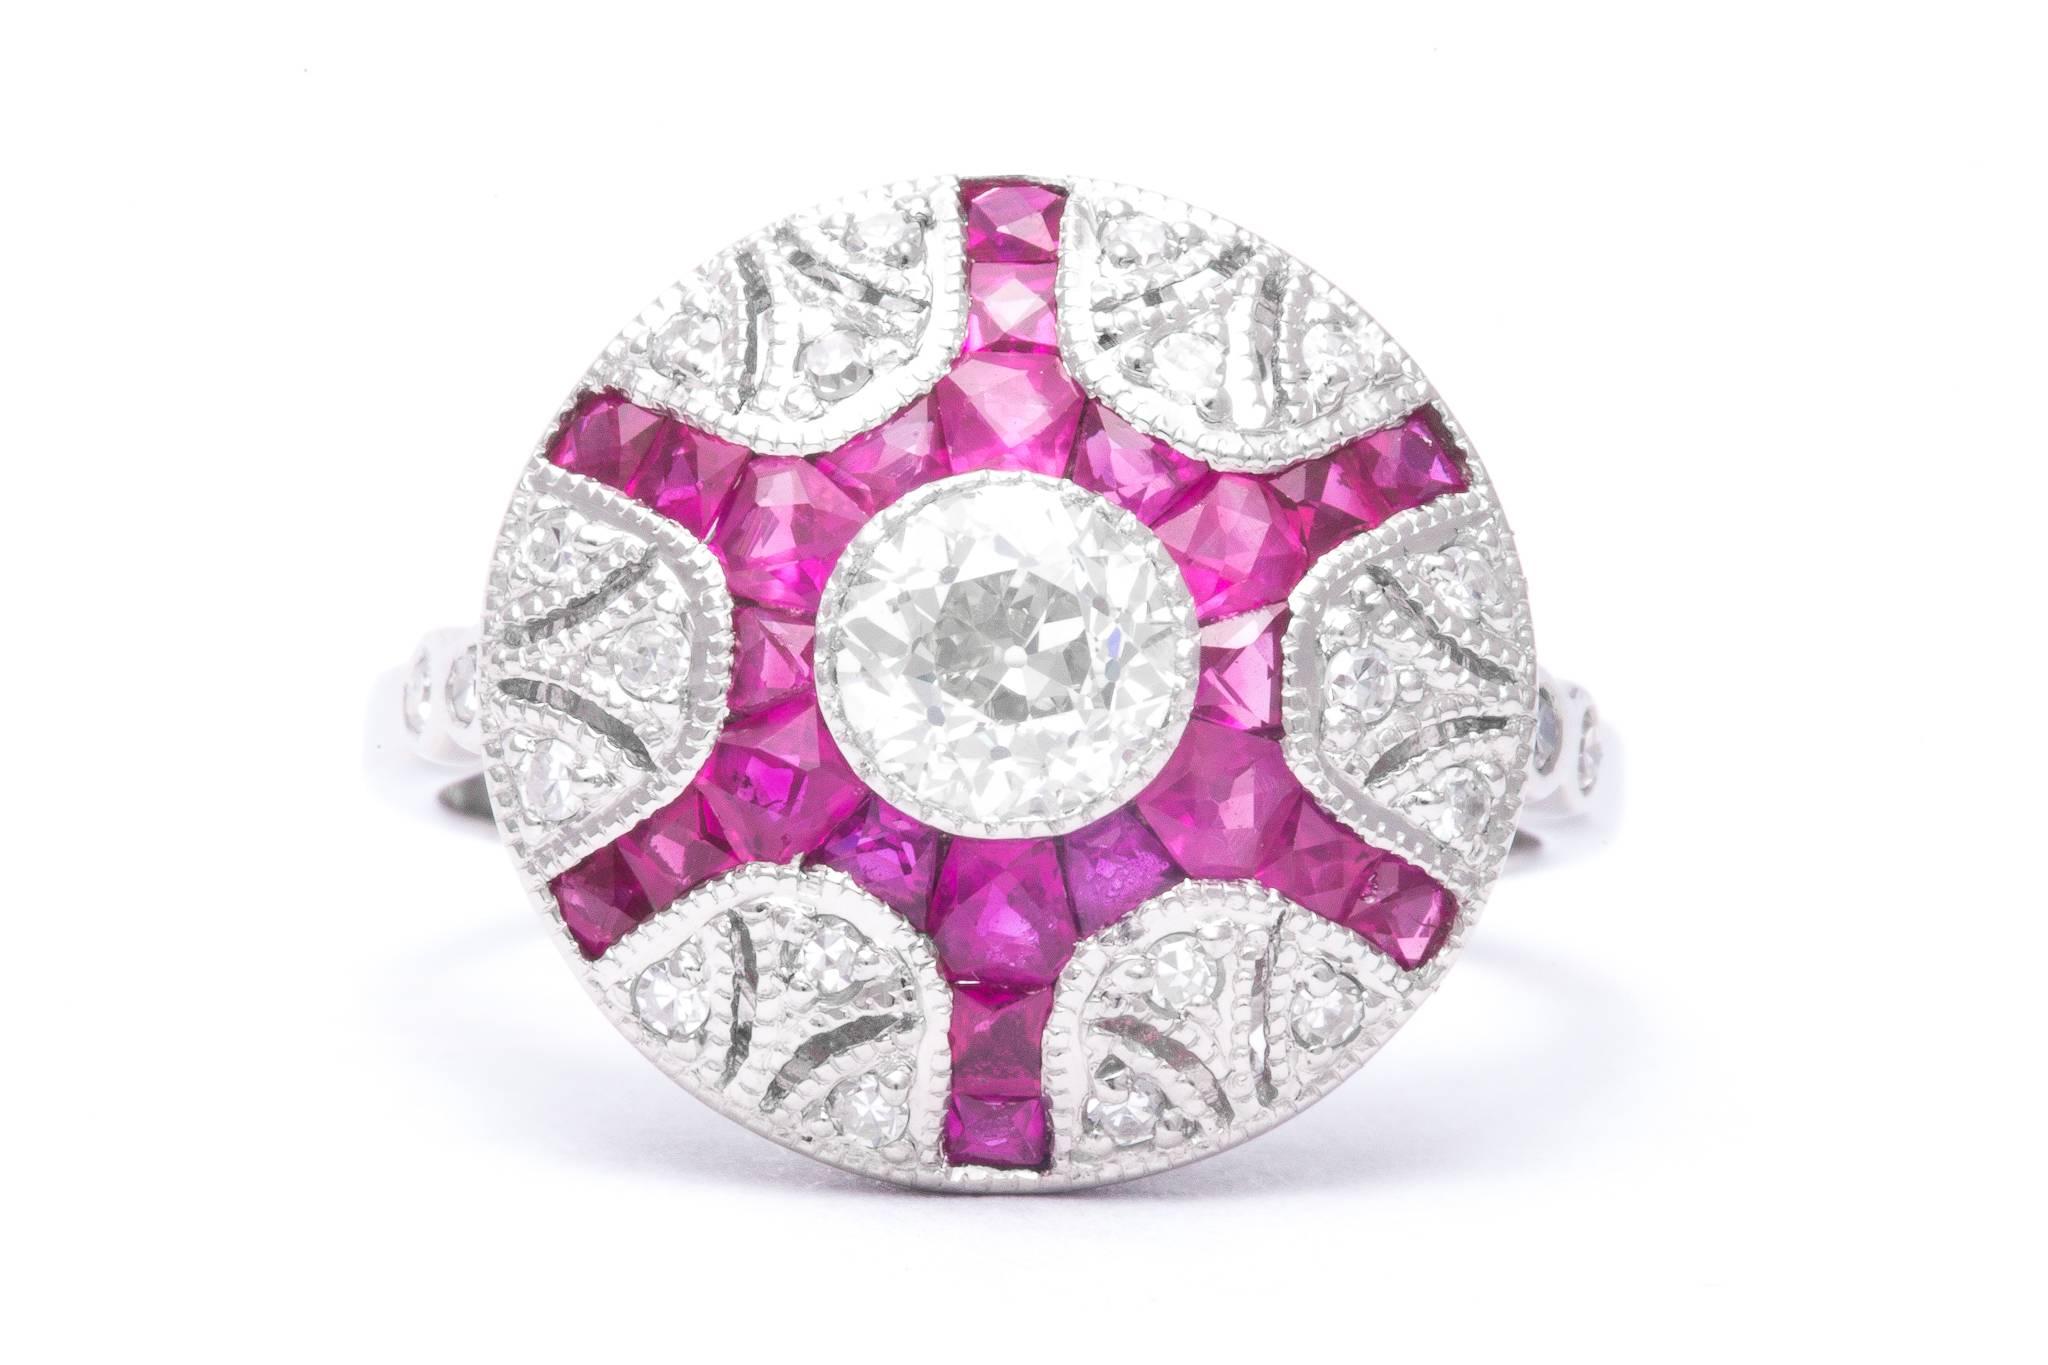 A beautiful ruby and diamond ring in luxurious platinum. Centered by a sparkling old European cut diamond in a mille grained bezel this ring features ravishing rich red French cut rubies and sparkling single cut diamonds in a handcrafted platinum